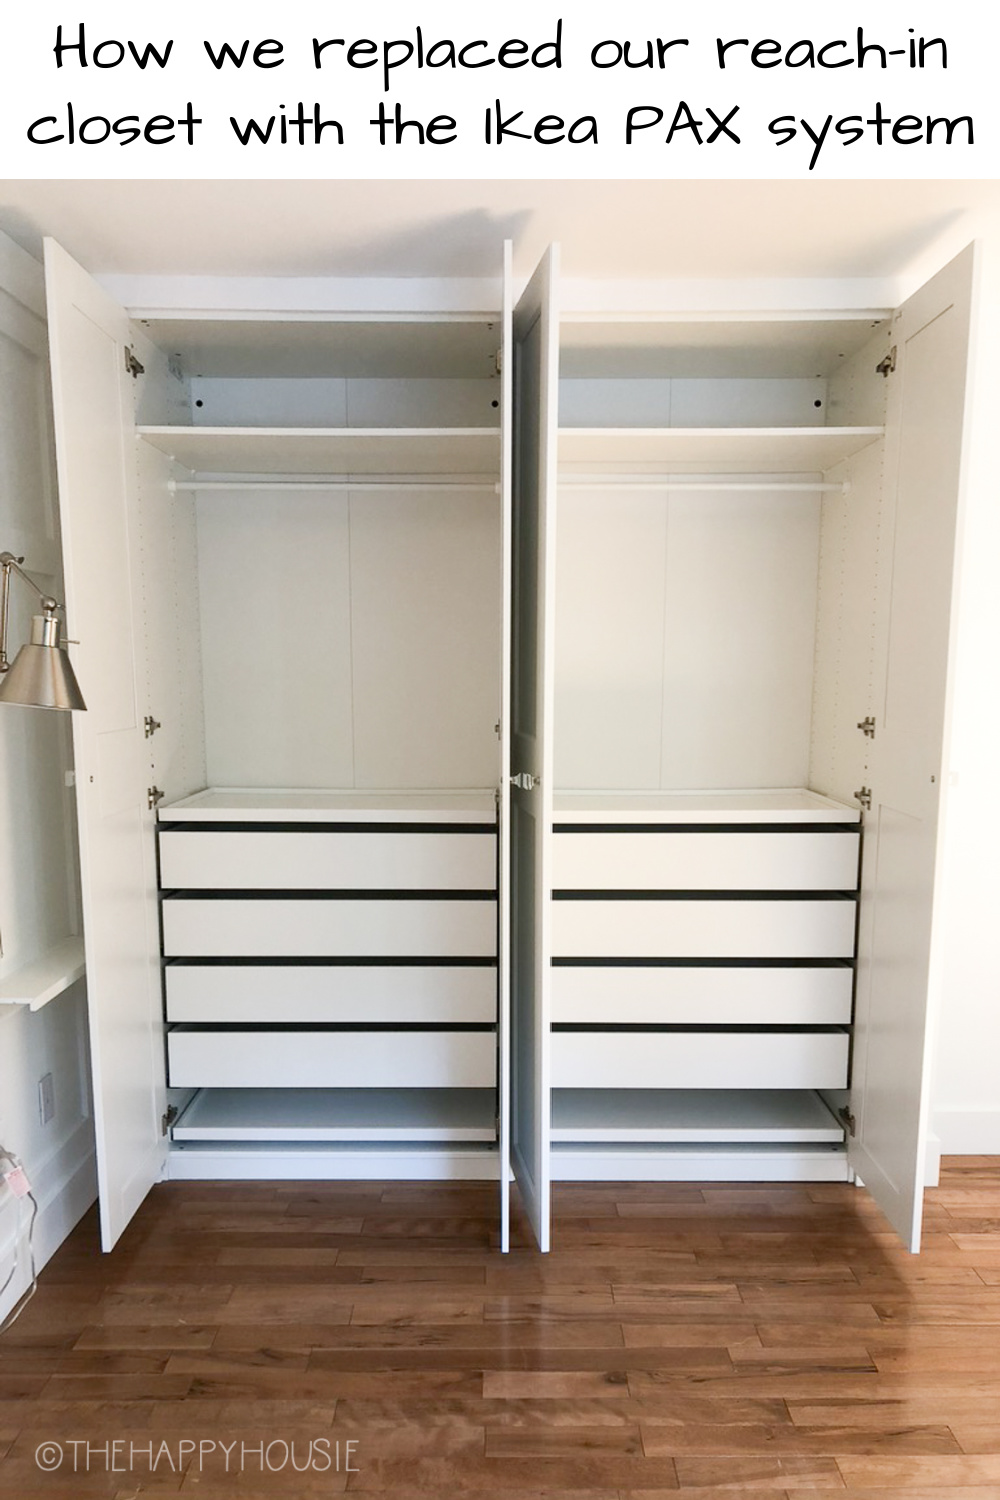 https://www.thehappyhousie.com/wp-content/uploads/2021/02/how-we-replaced-our-reach-in-closet-with-an-Ikea-Pax-closet-system.jpg